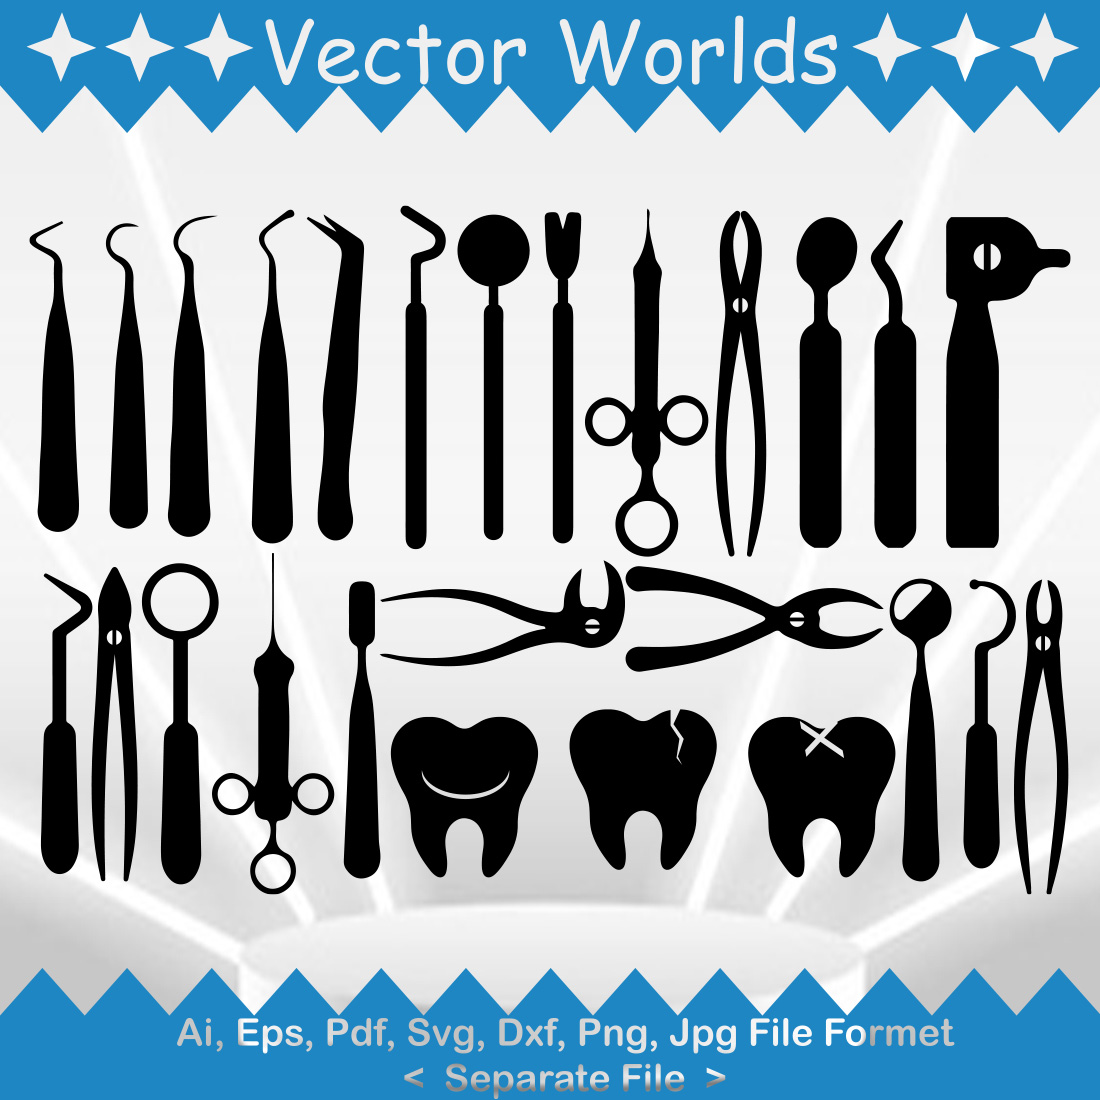 A pack of enchanting images of silhouettes of dentist tools